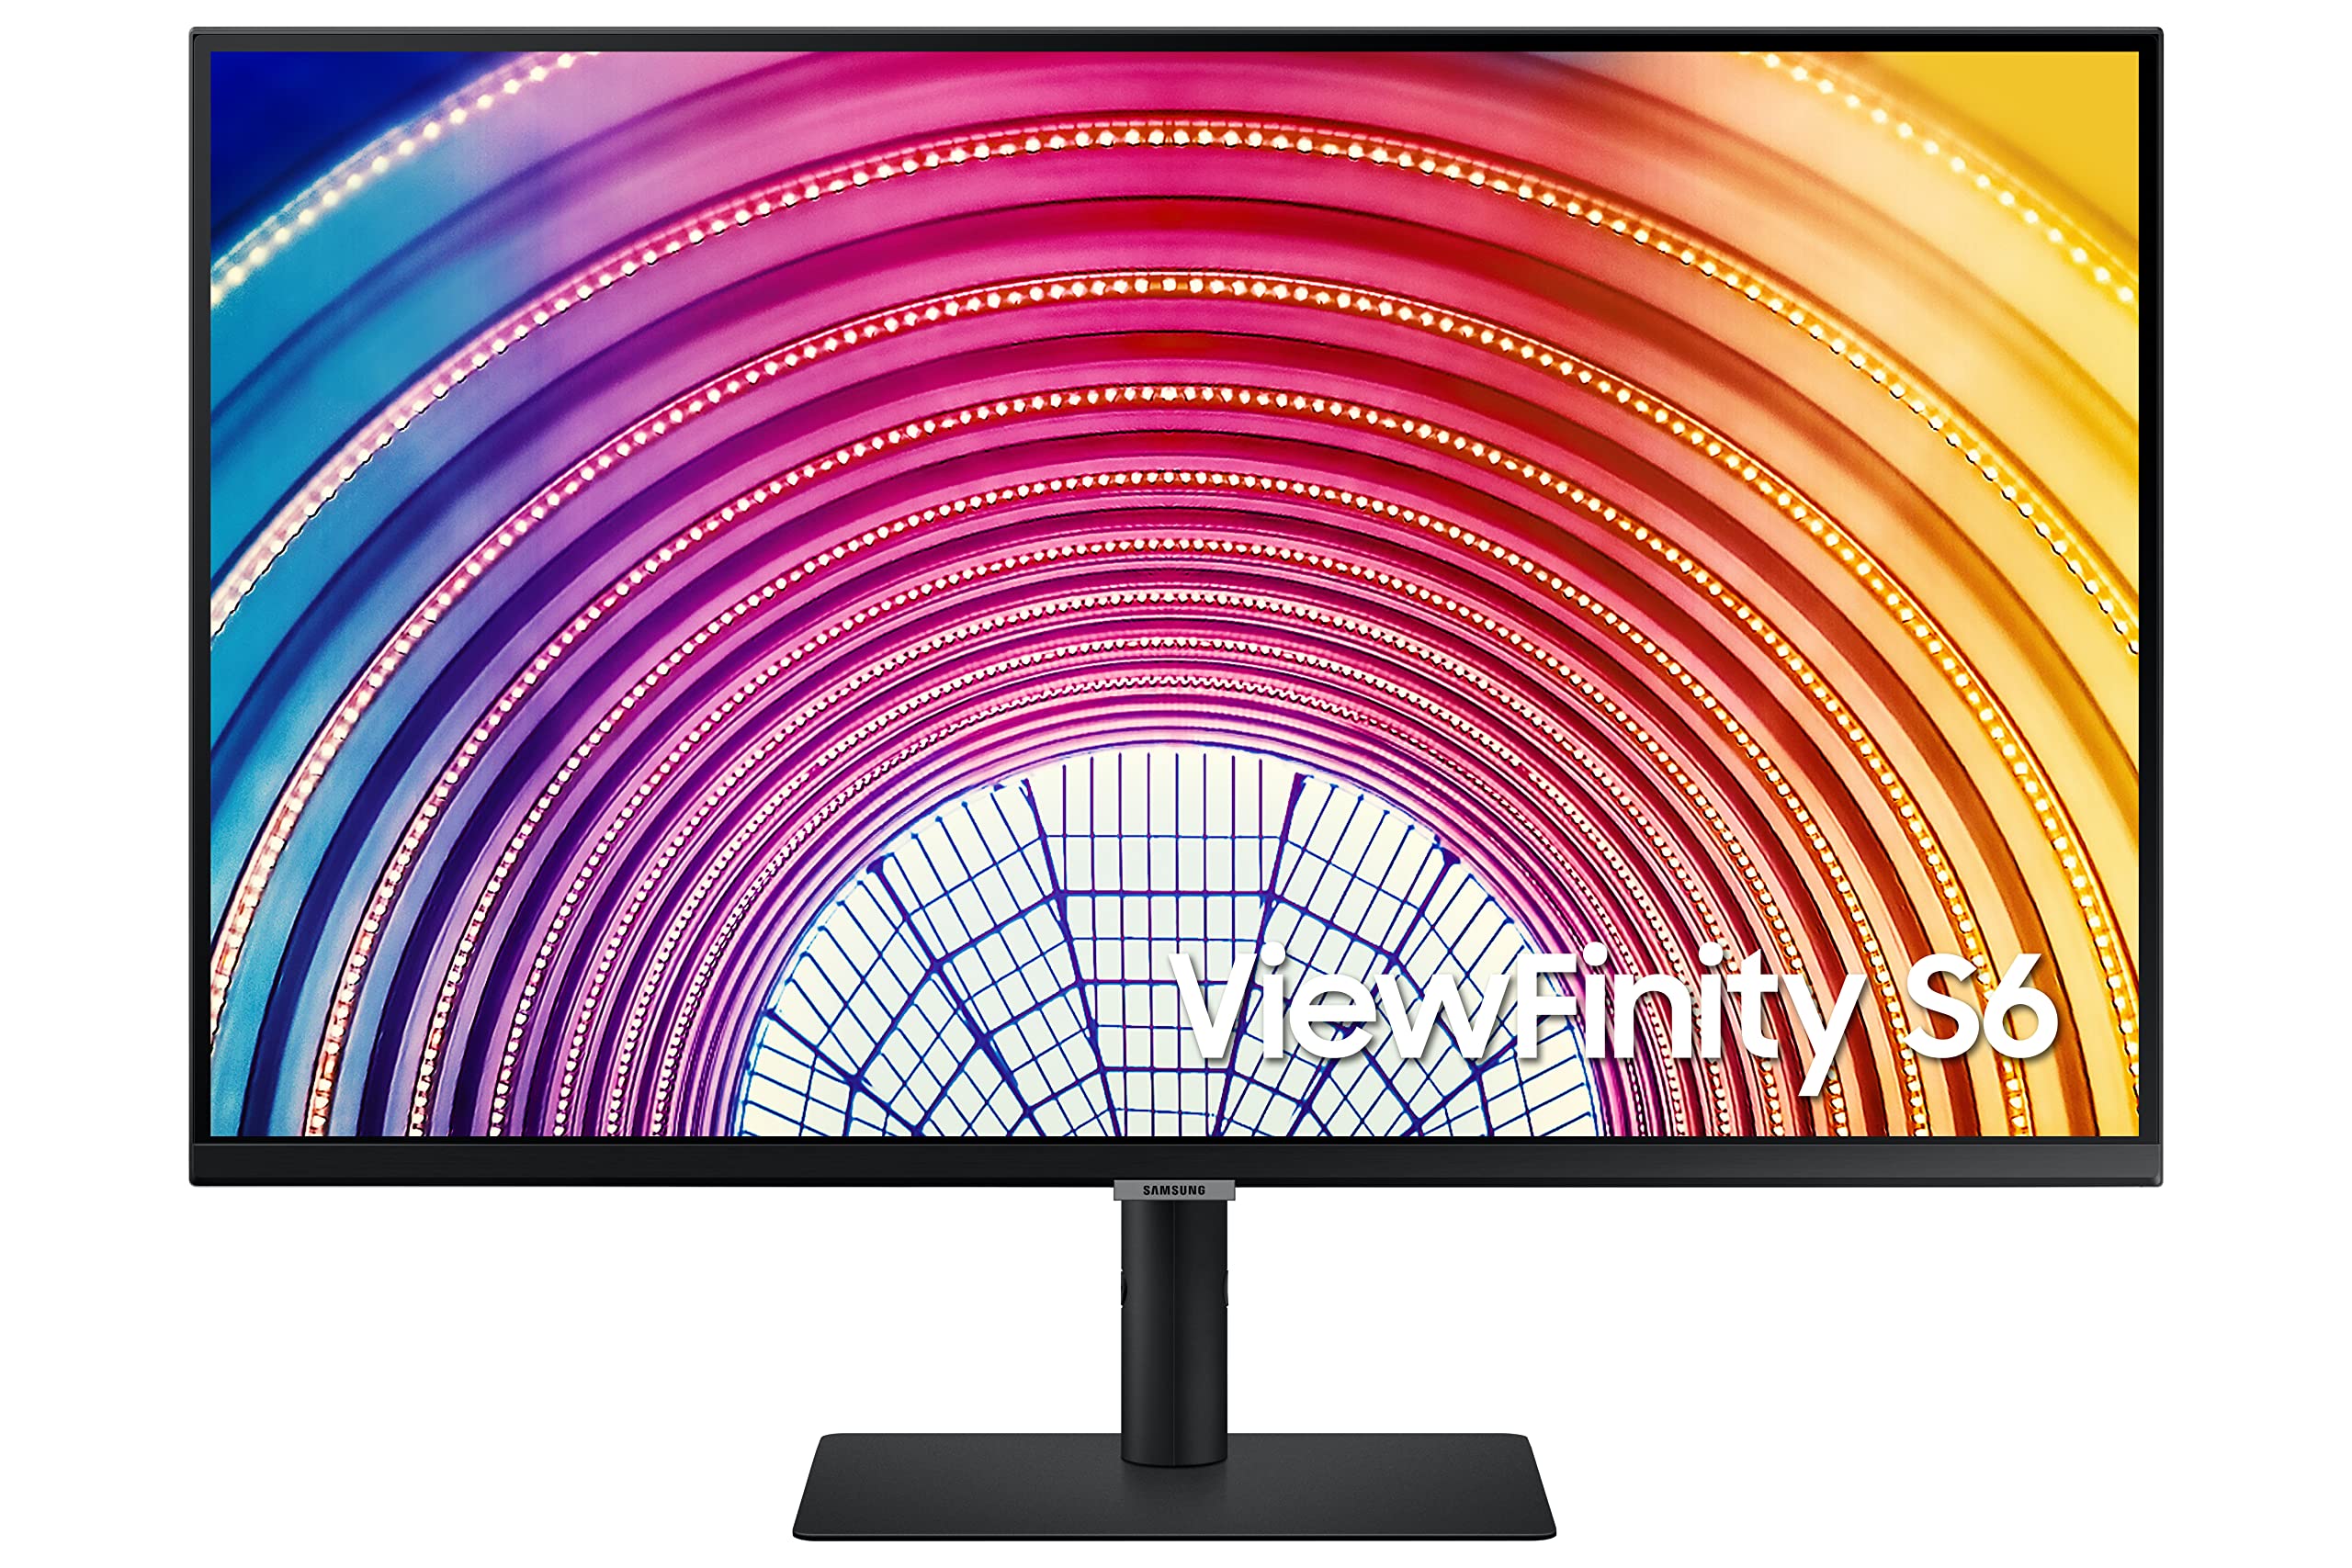 SAMSUNG S60A Series 27-Inch Viewfinity WQHD 2560x1440 Computer Monitor 75Hz IPS Panel HDMI HDR10 1 Billion Colors He